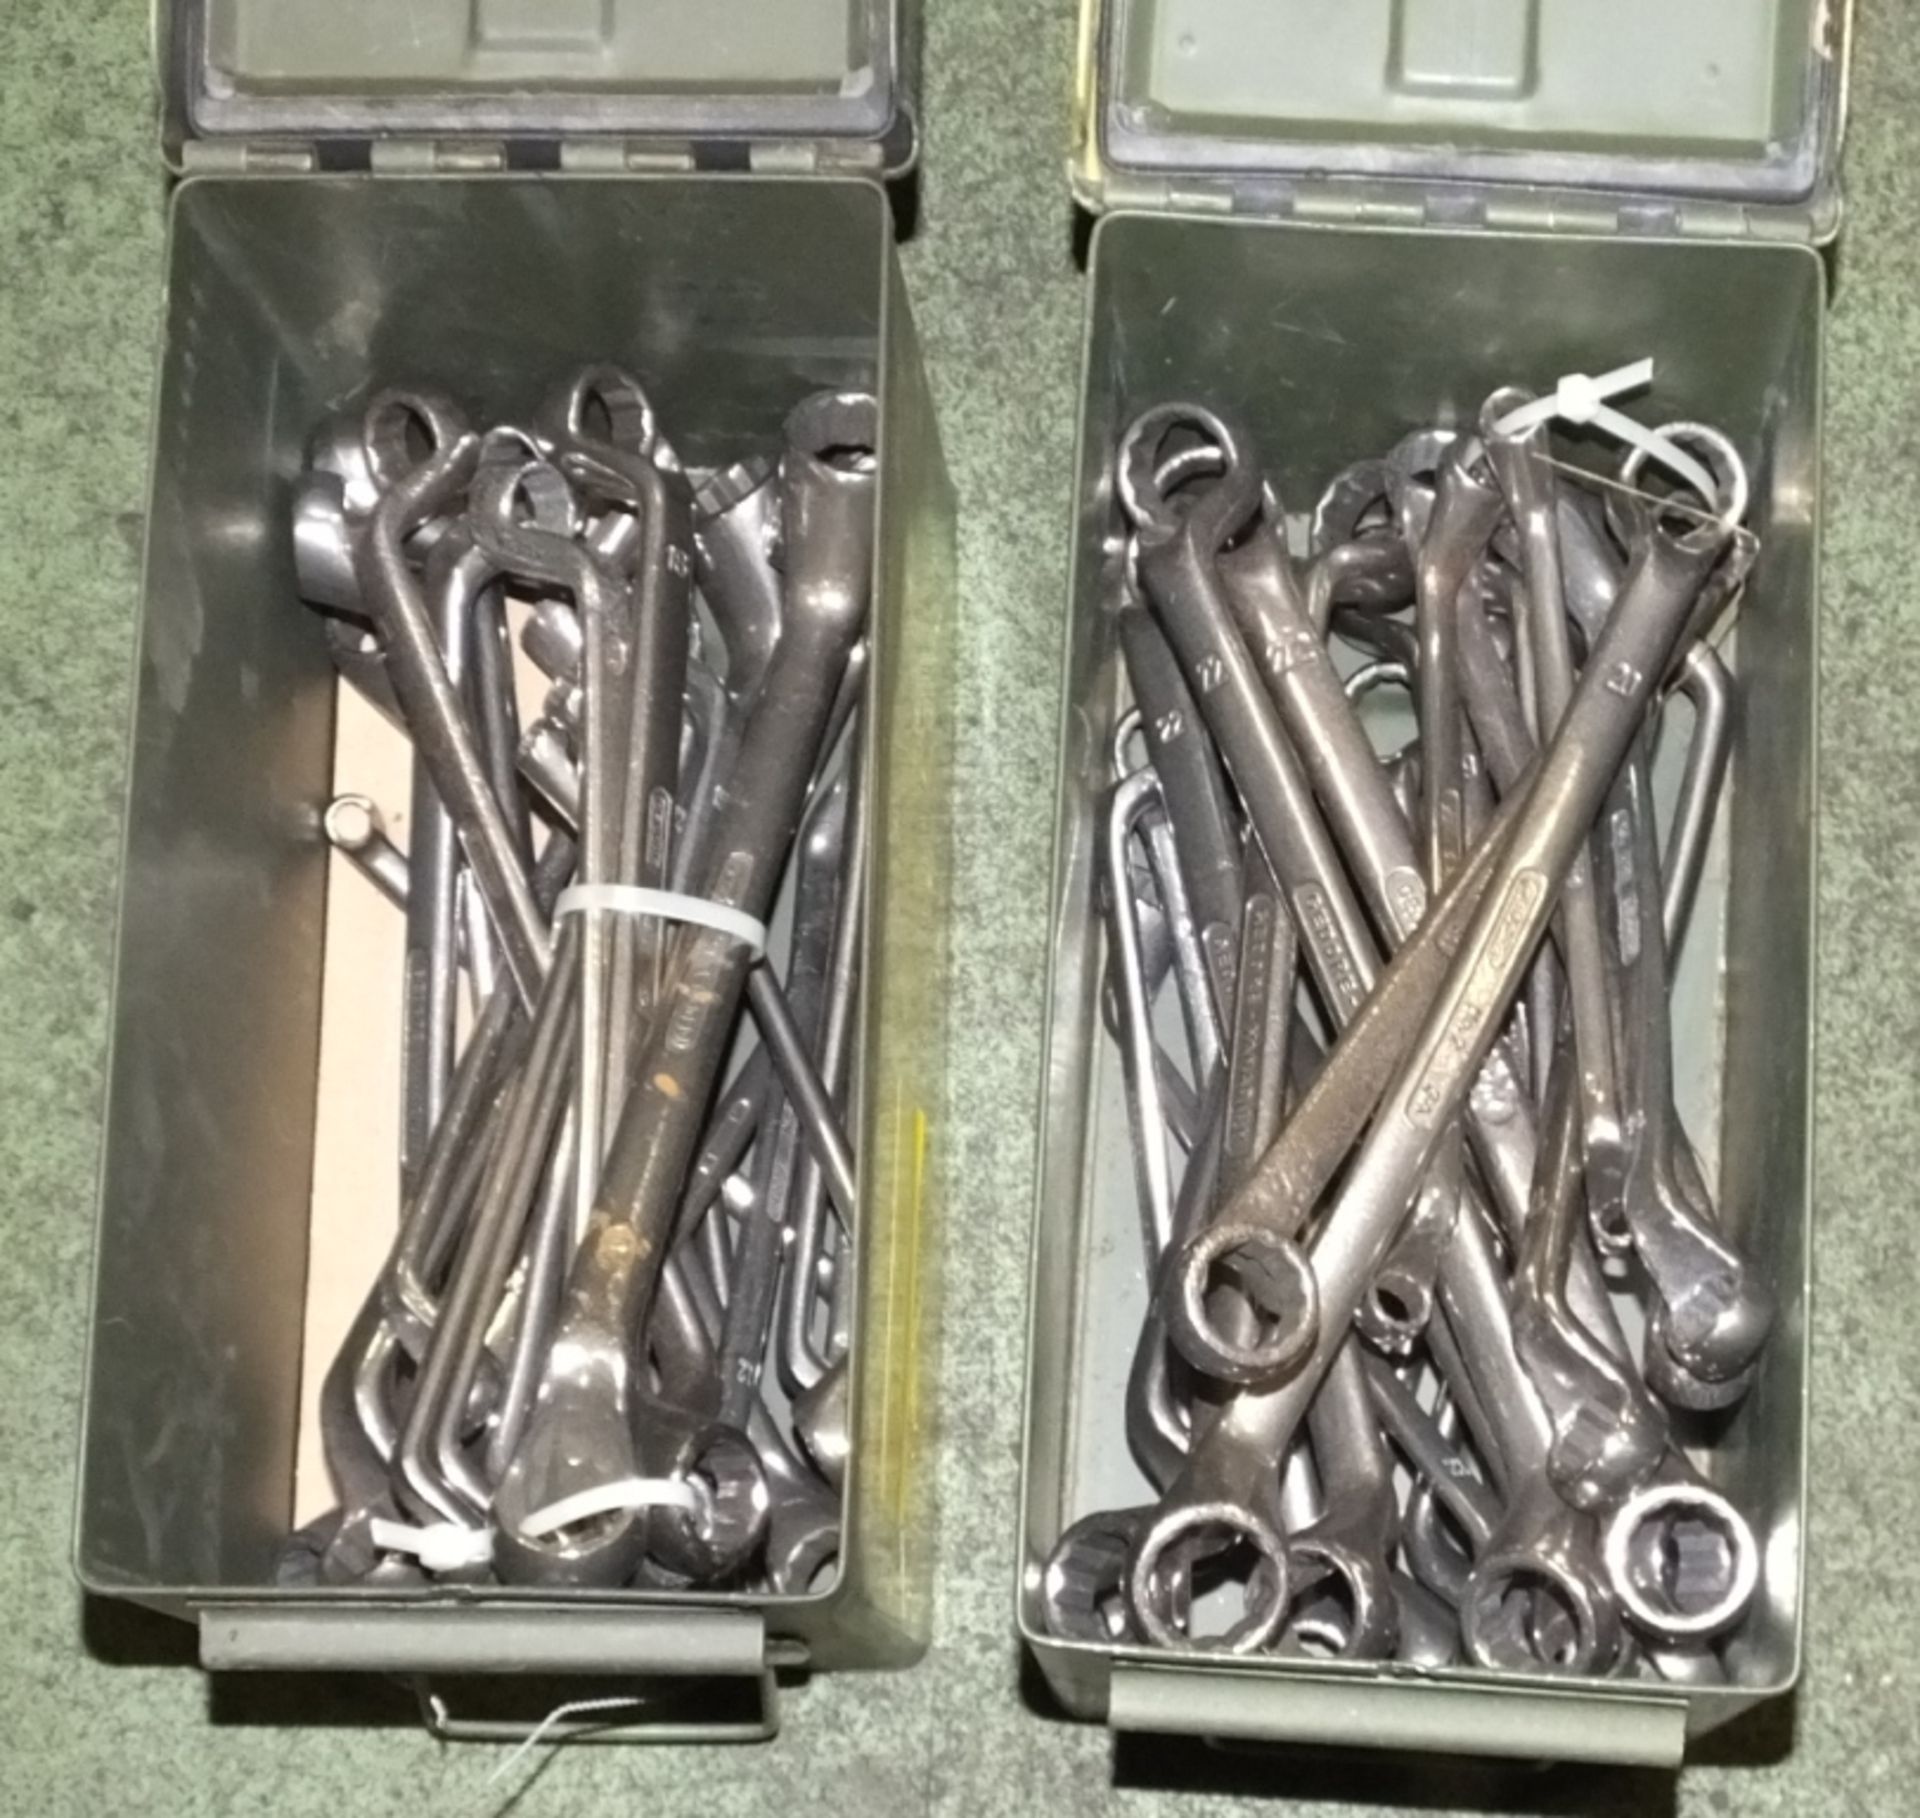 Ring Spanners in 2x Ex-MoD ammo tins